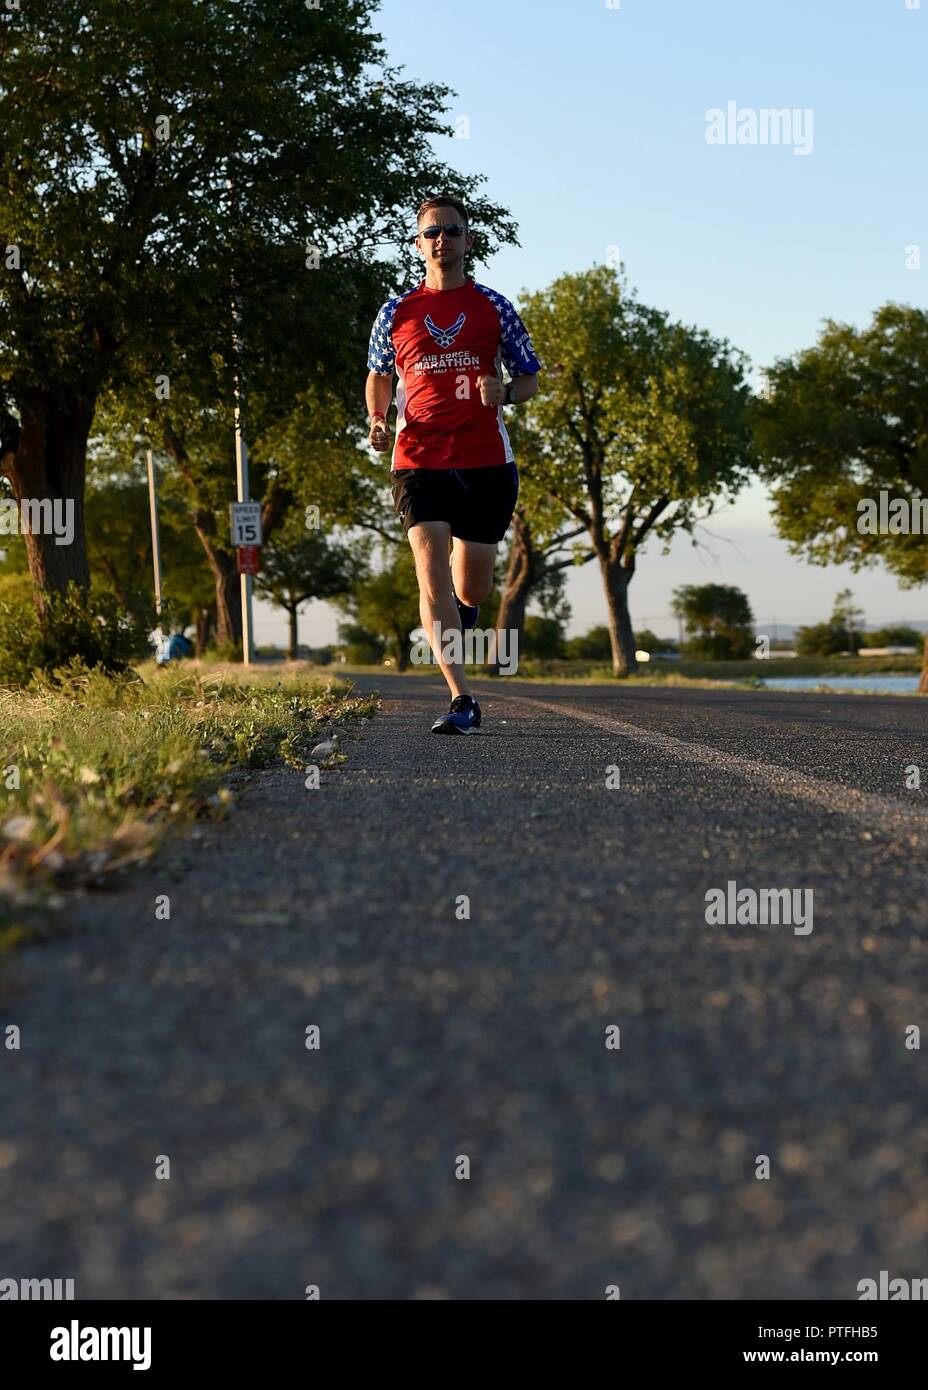 U.S. Air Force Tech. Sgt. Logan Berry, 54th Air Refueling Squadron instructor boom operator, paces himself while running, July 20, 2017 at Altus, Oklahoma. After an unsuccessful running portion of a physical training test, Berry motivated himself to become a better runner and has competed in several long-distance running events, including the Air Force Marathon. Stock Photo